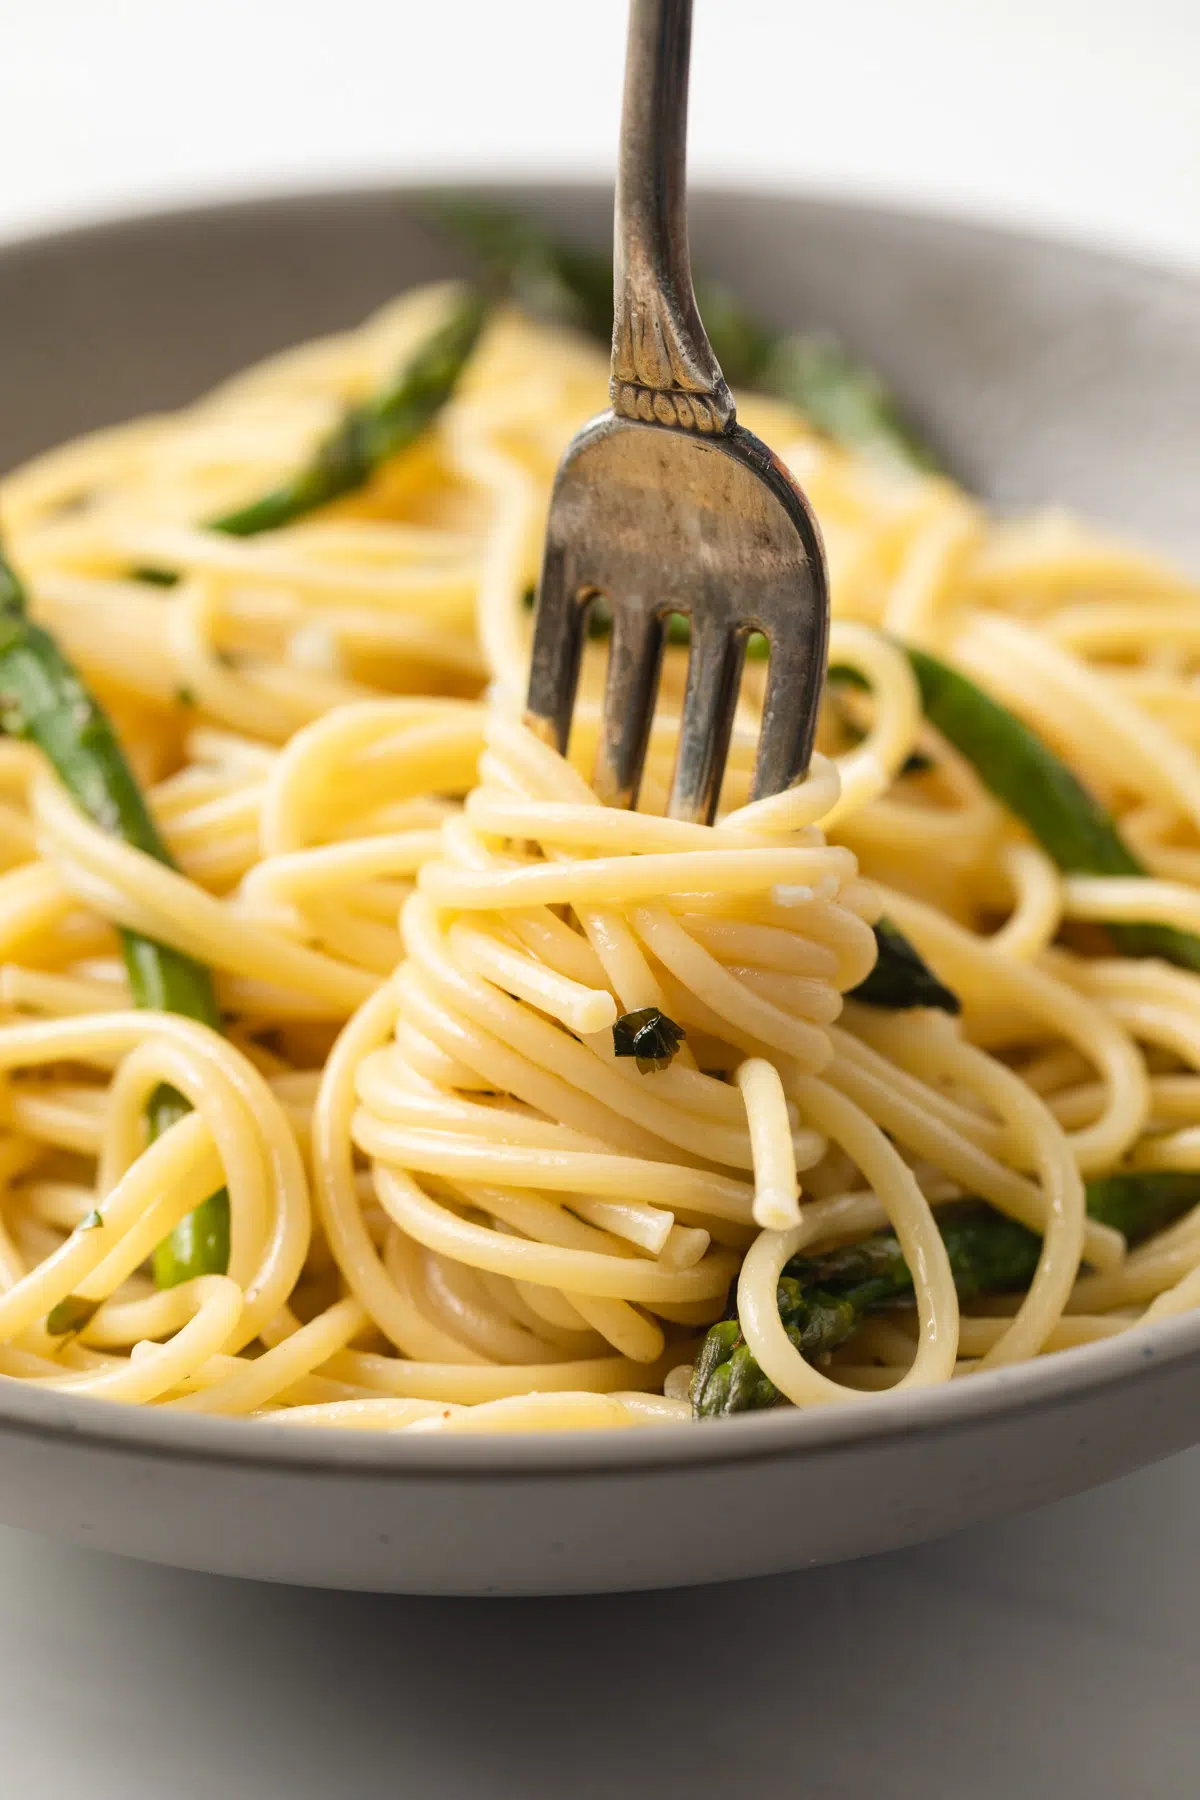 Spaghetti with lemon butter sauce swirled on a fork.